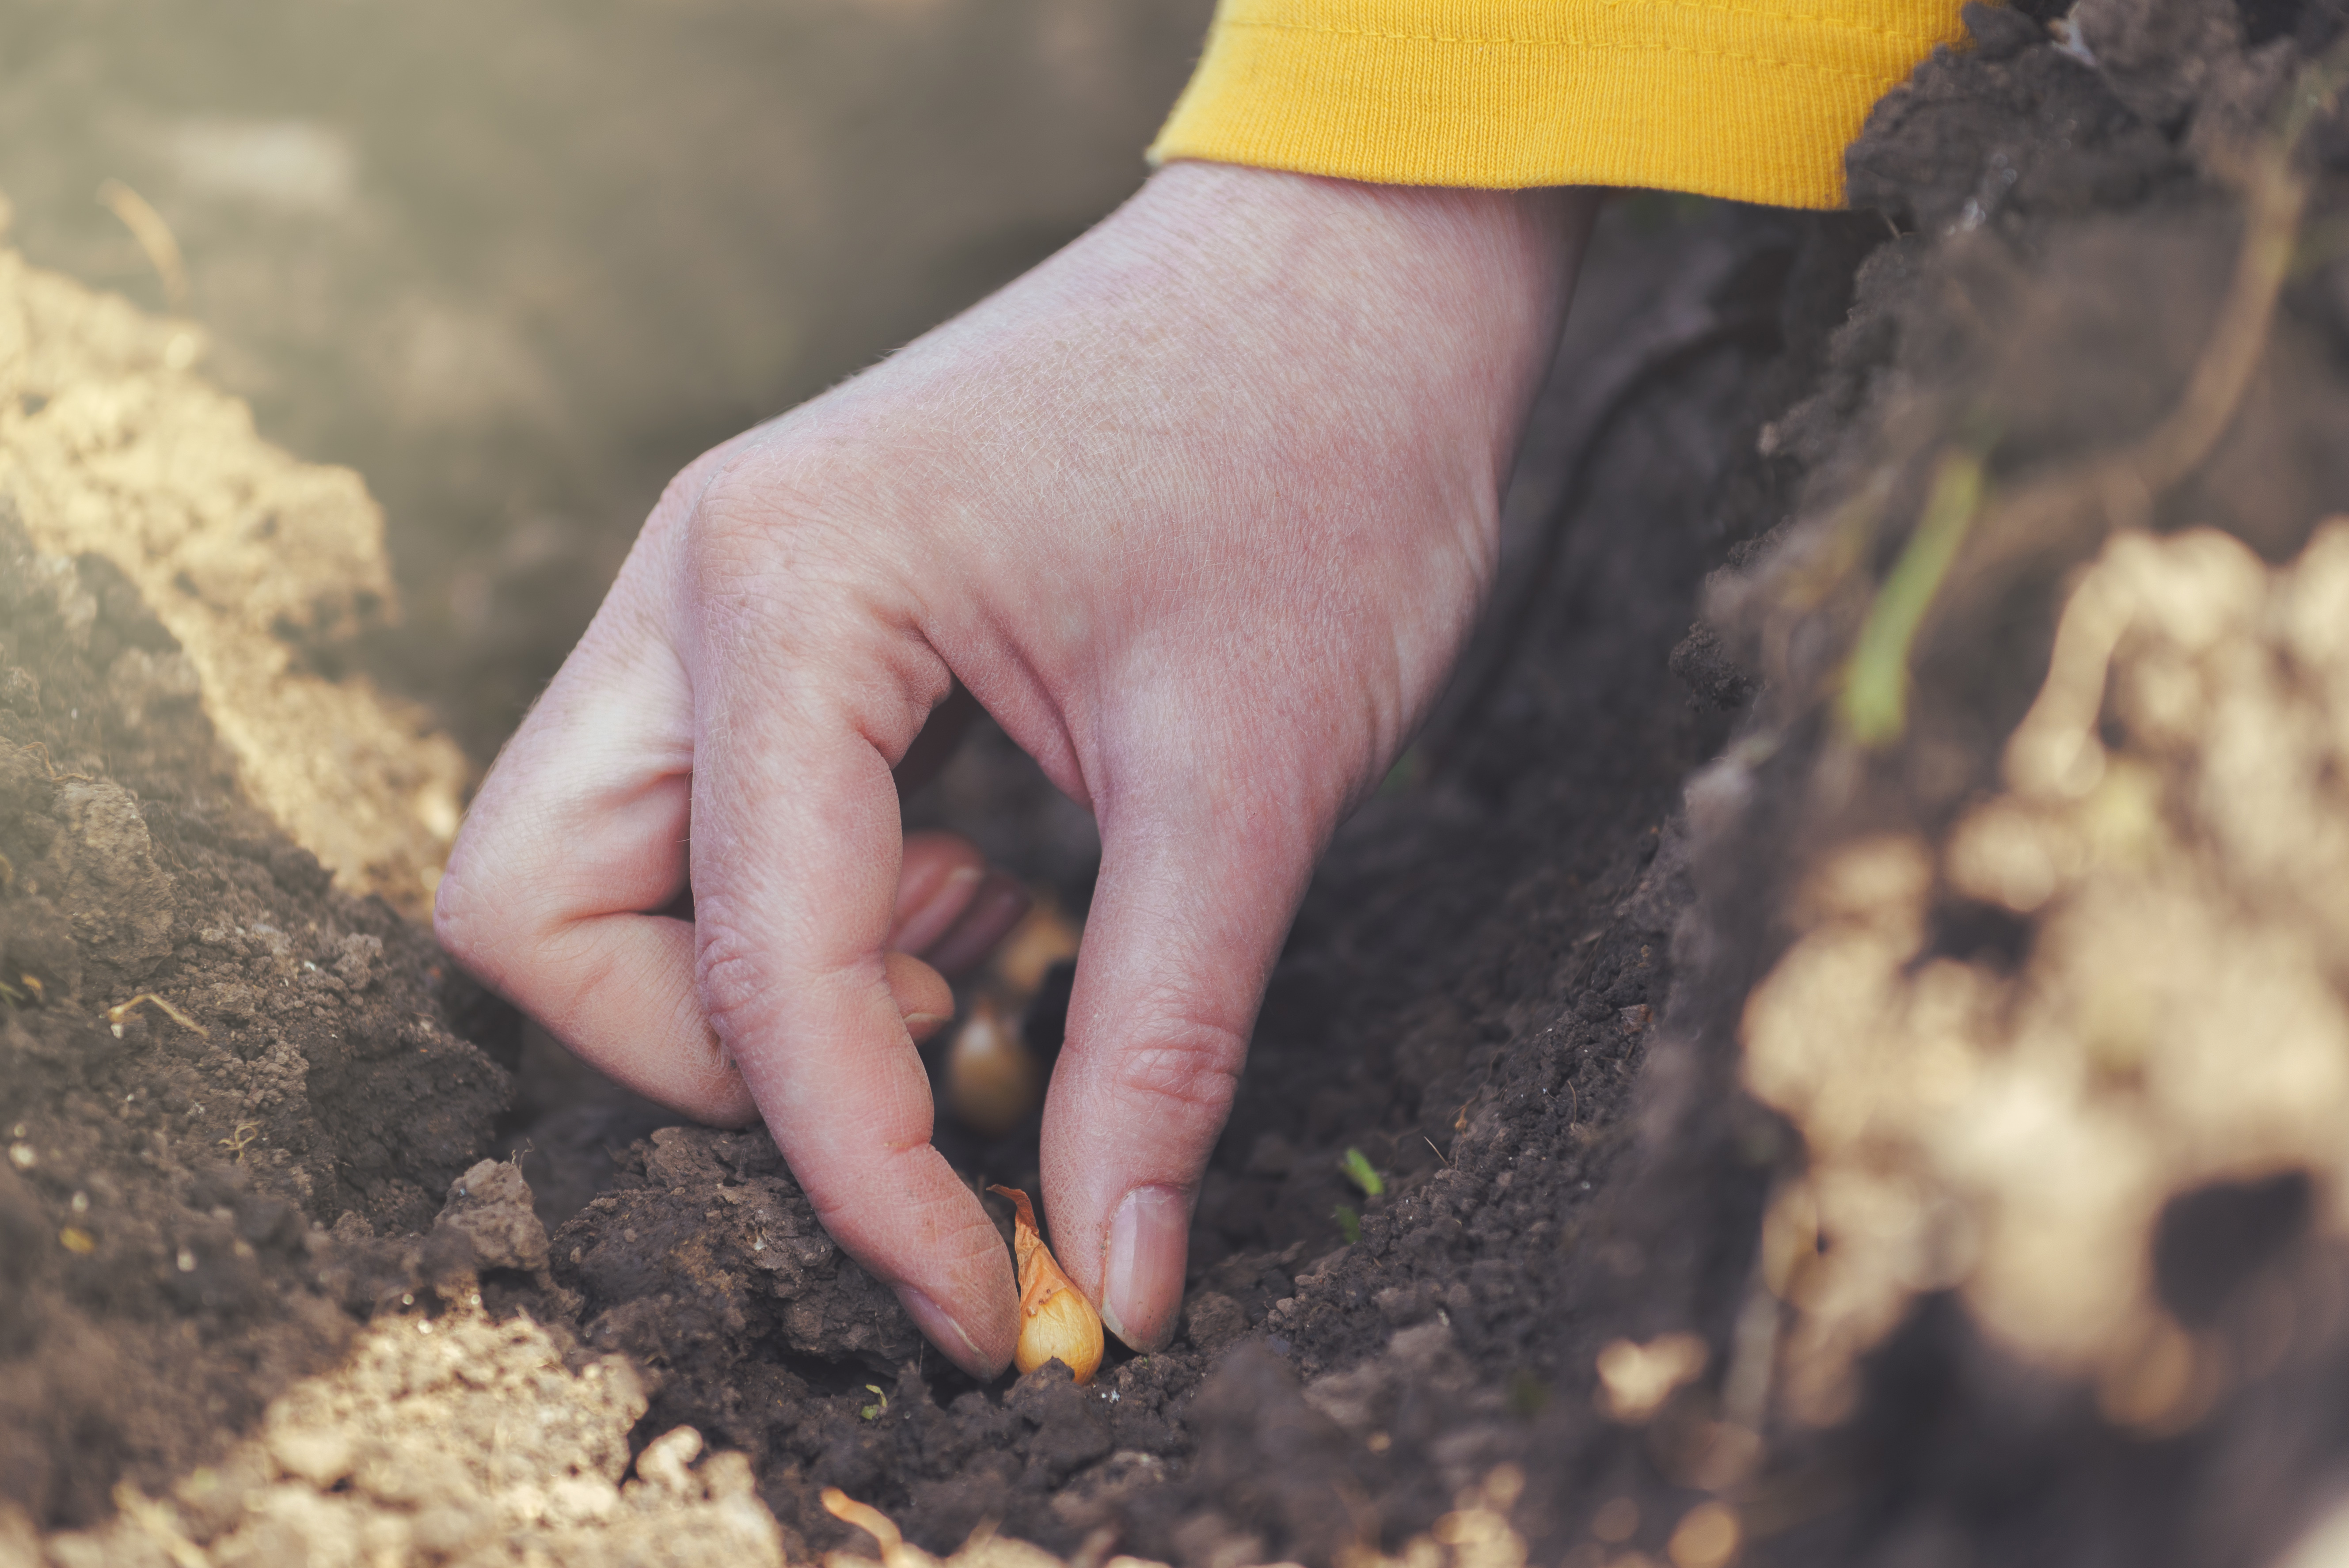 A hand planting a seed in soil.